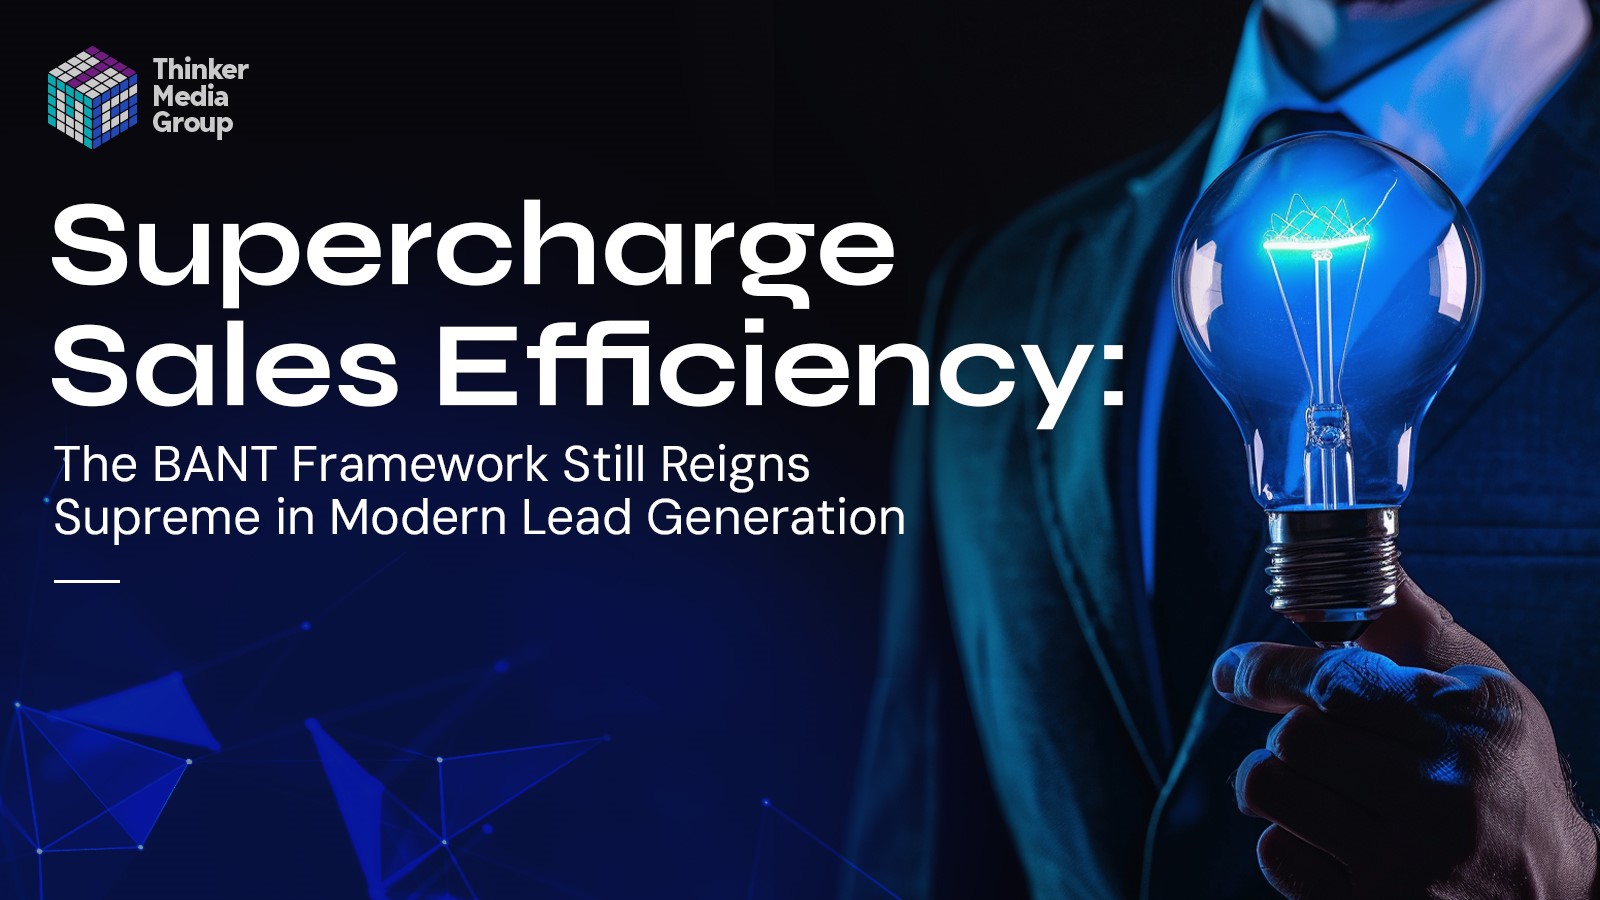 You are currently viewing Supercharge Sales Efficiency: The BANT Framework Still Reigns Supreme in Modern Lead Generation